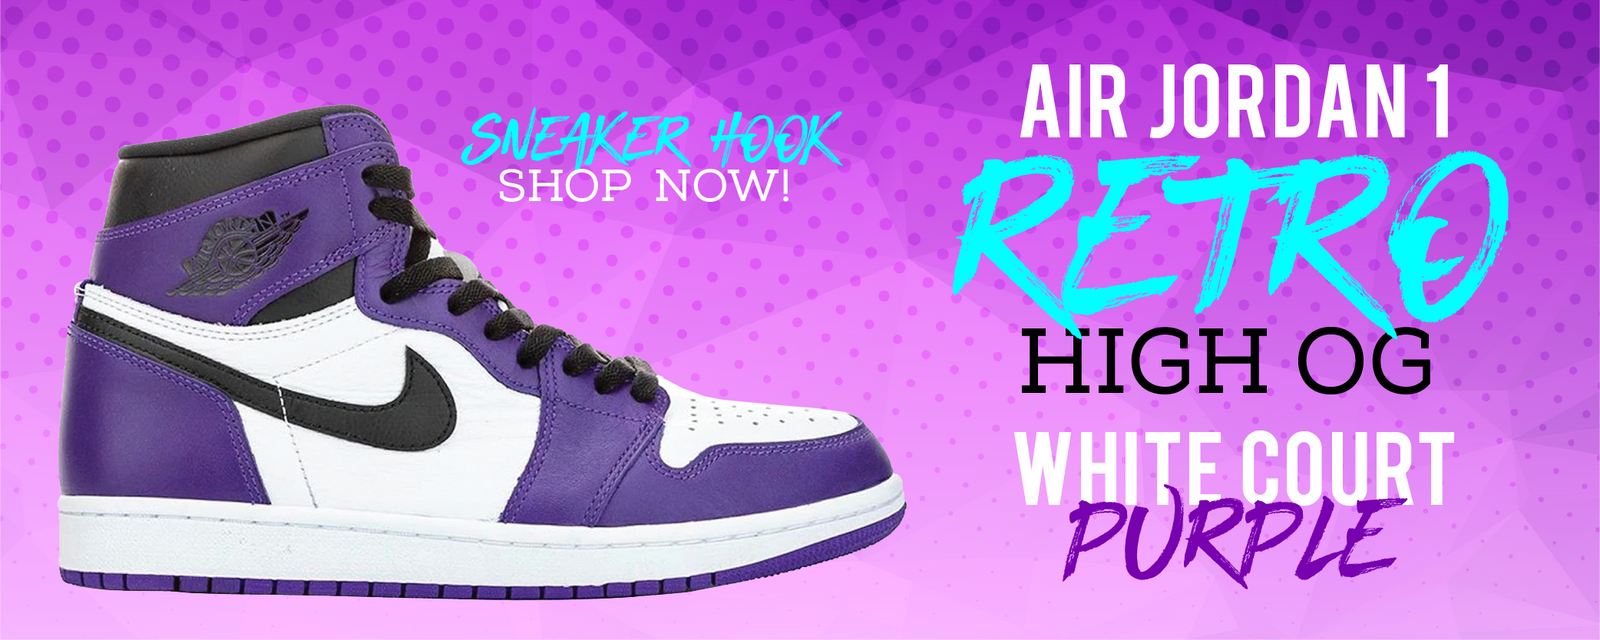 Jordan 1 Retro High Og White Court Purple Clothing To Match Sneakers ged T Shirt Cap Swag